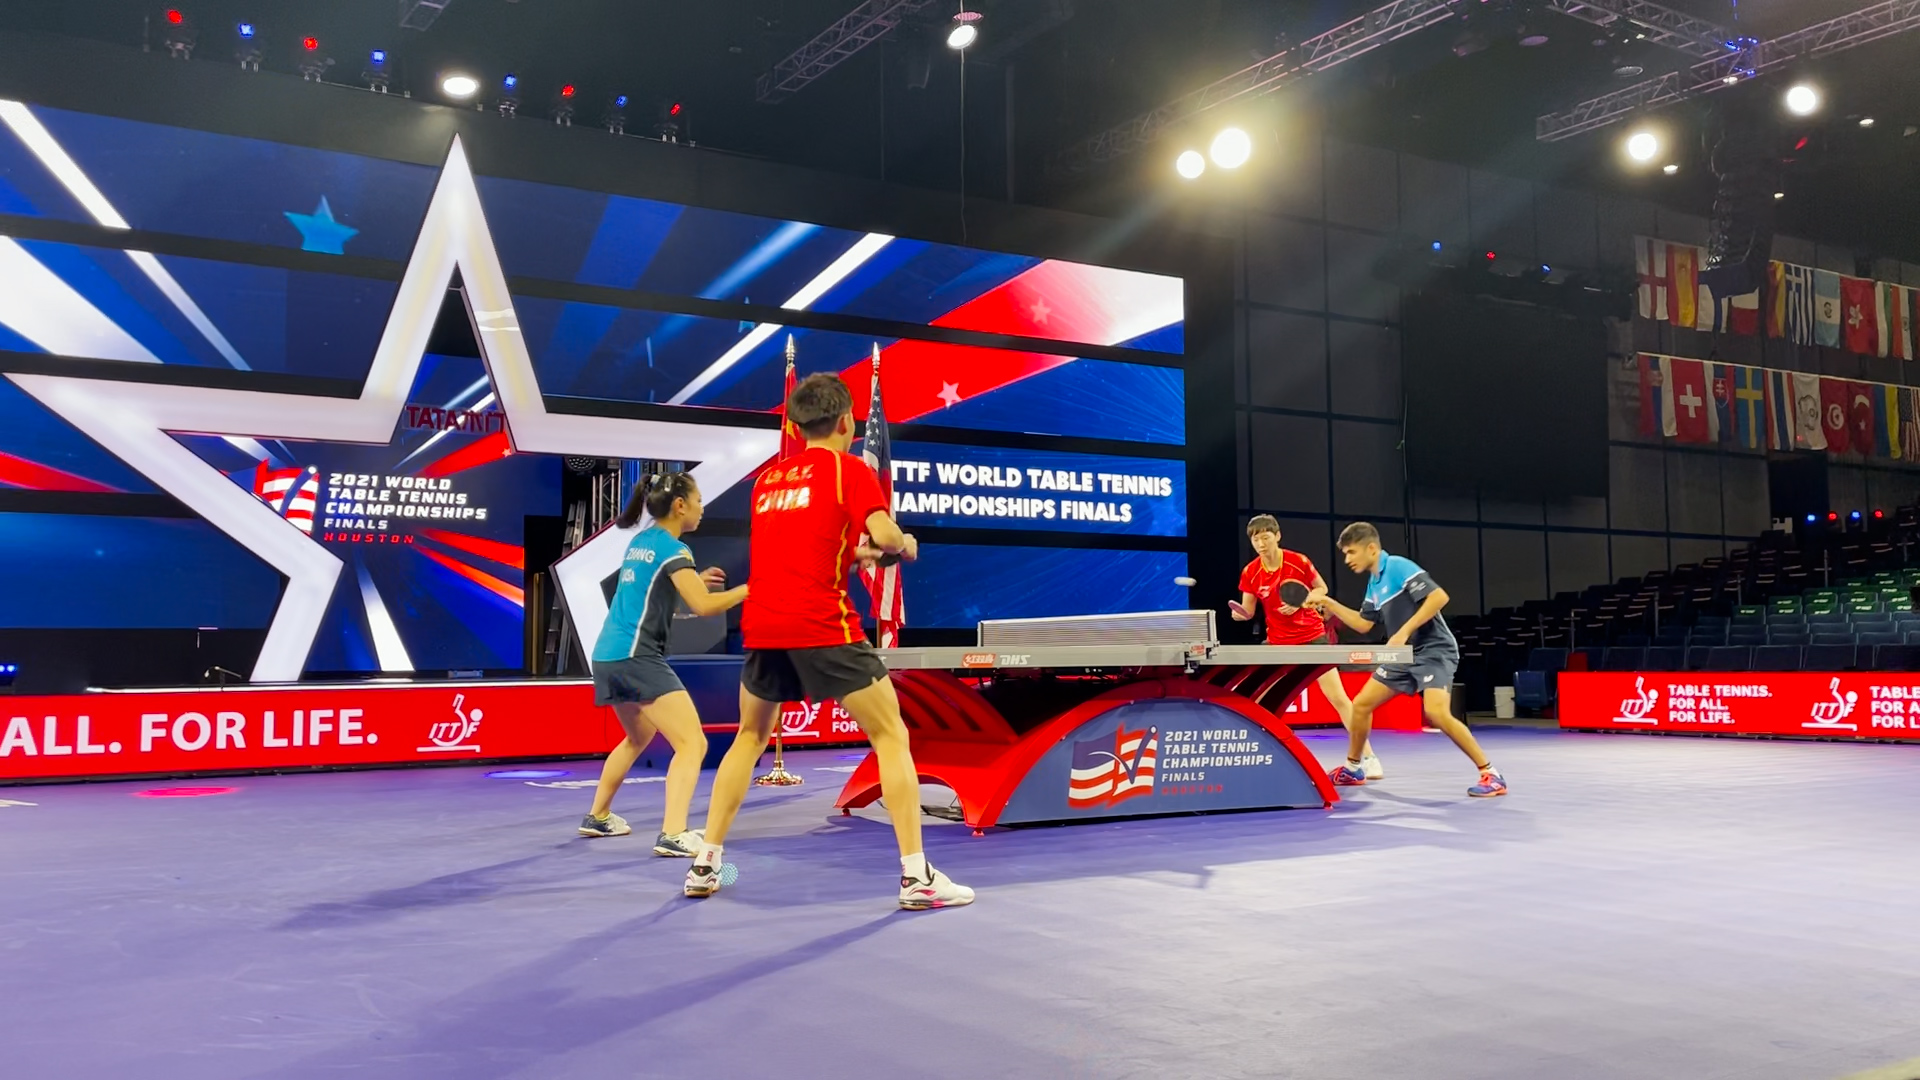 Chinese, U.S. table tennis players join forces at 2021 WTTC CGTN